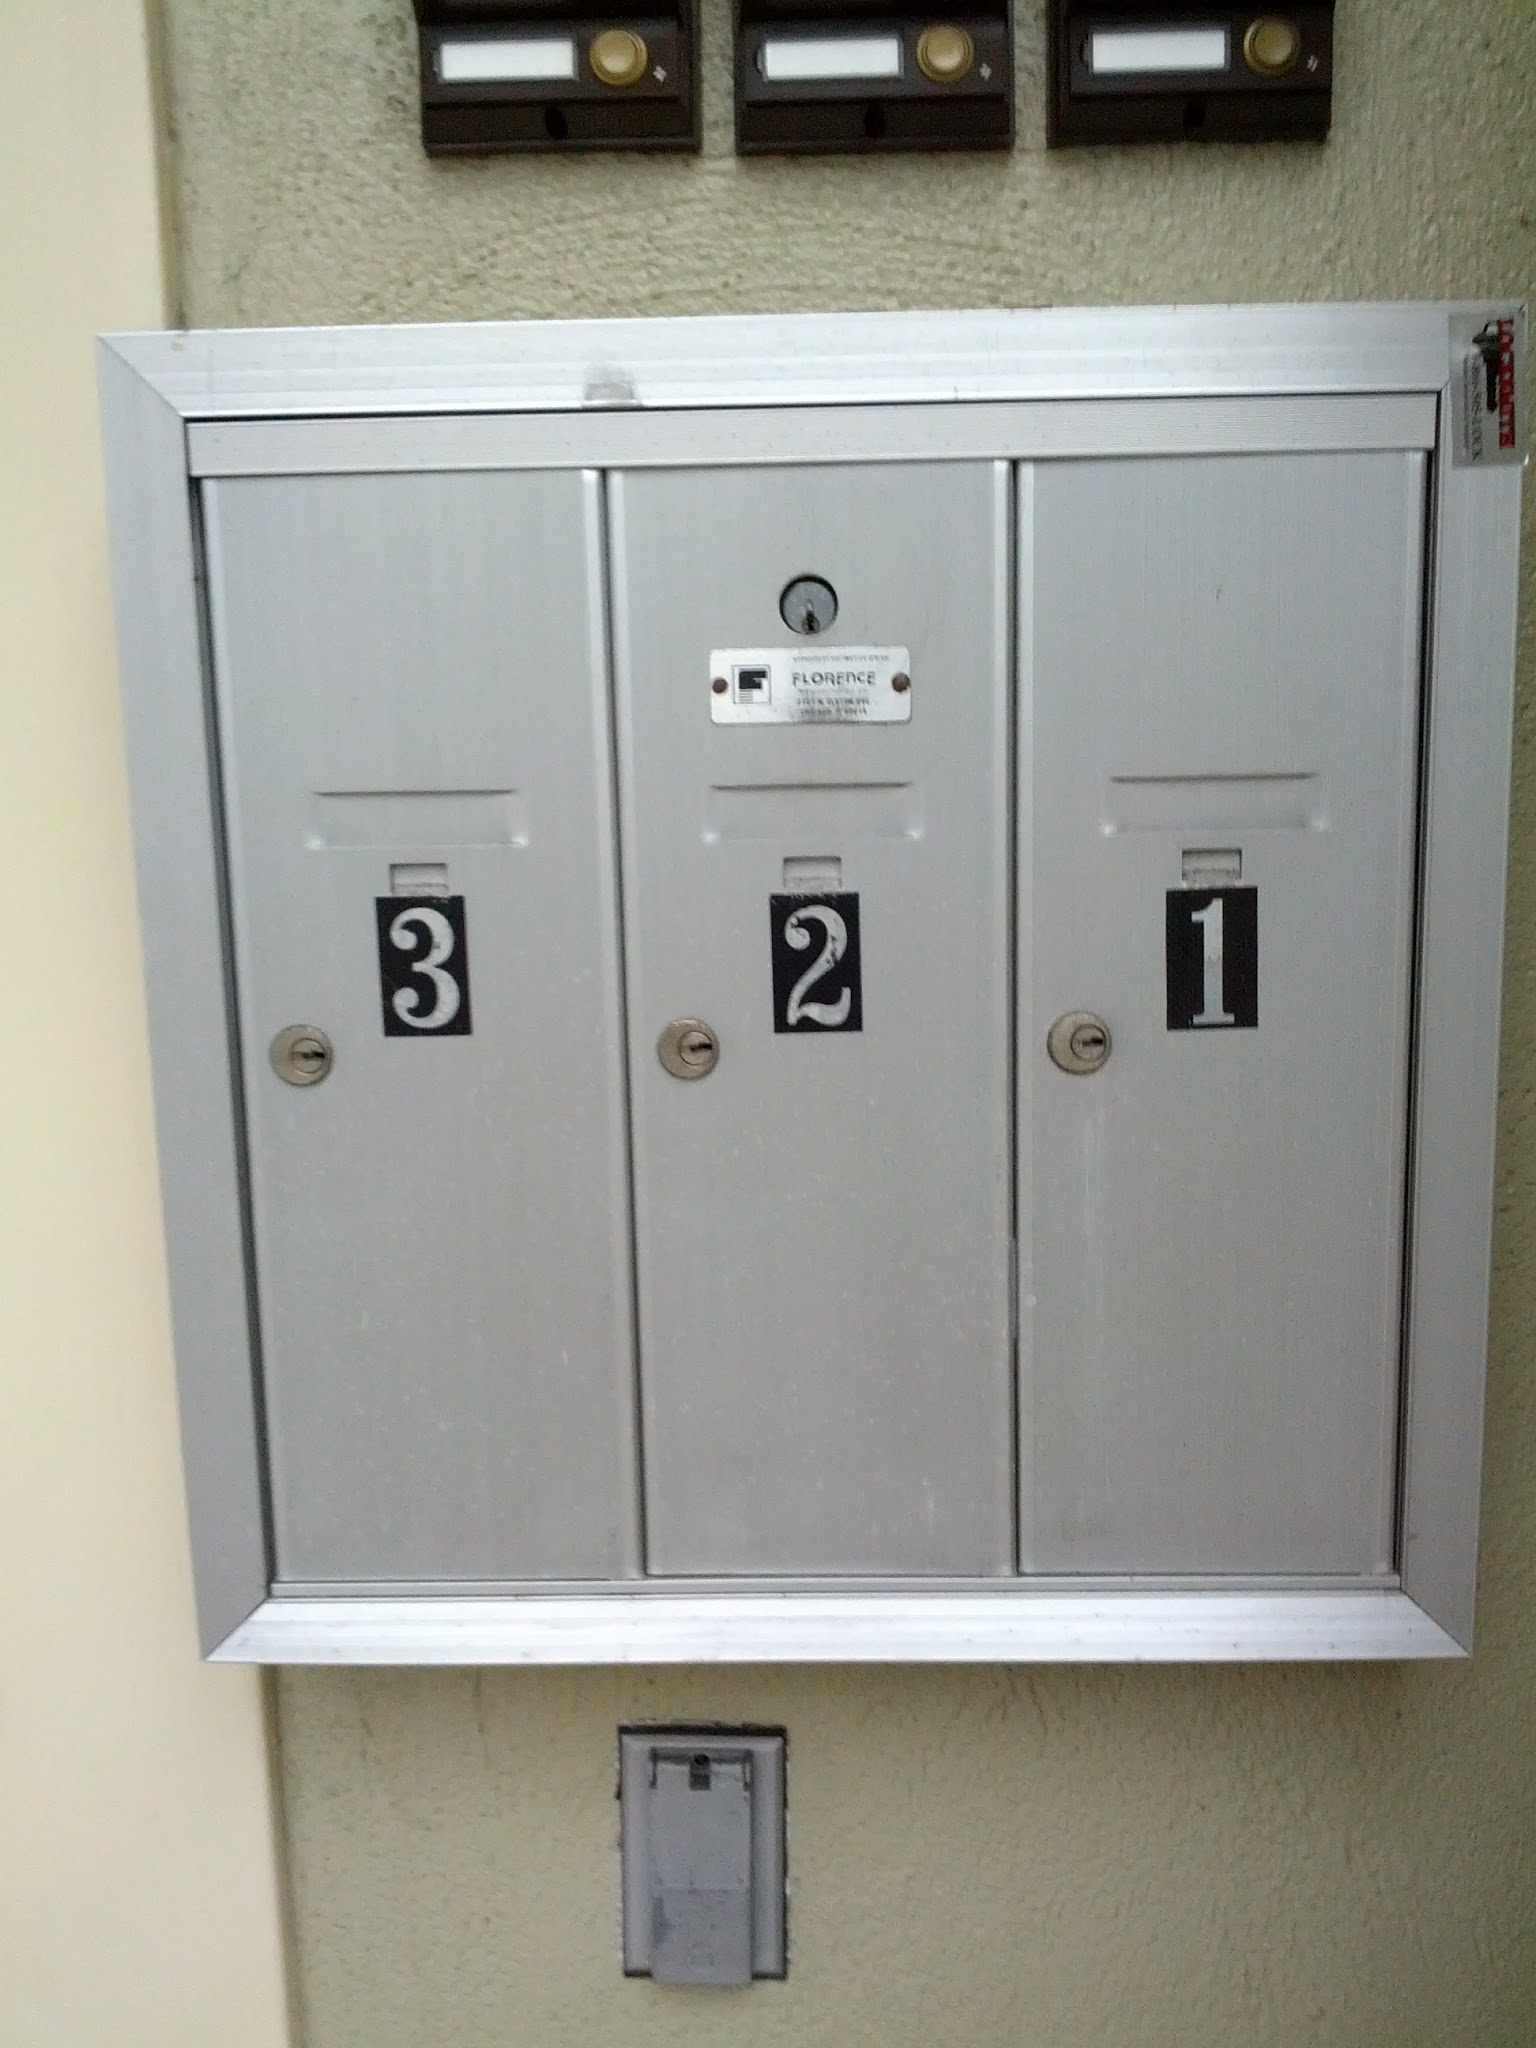 two mailboxs on a wall and the numbers is located in each panel